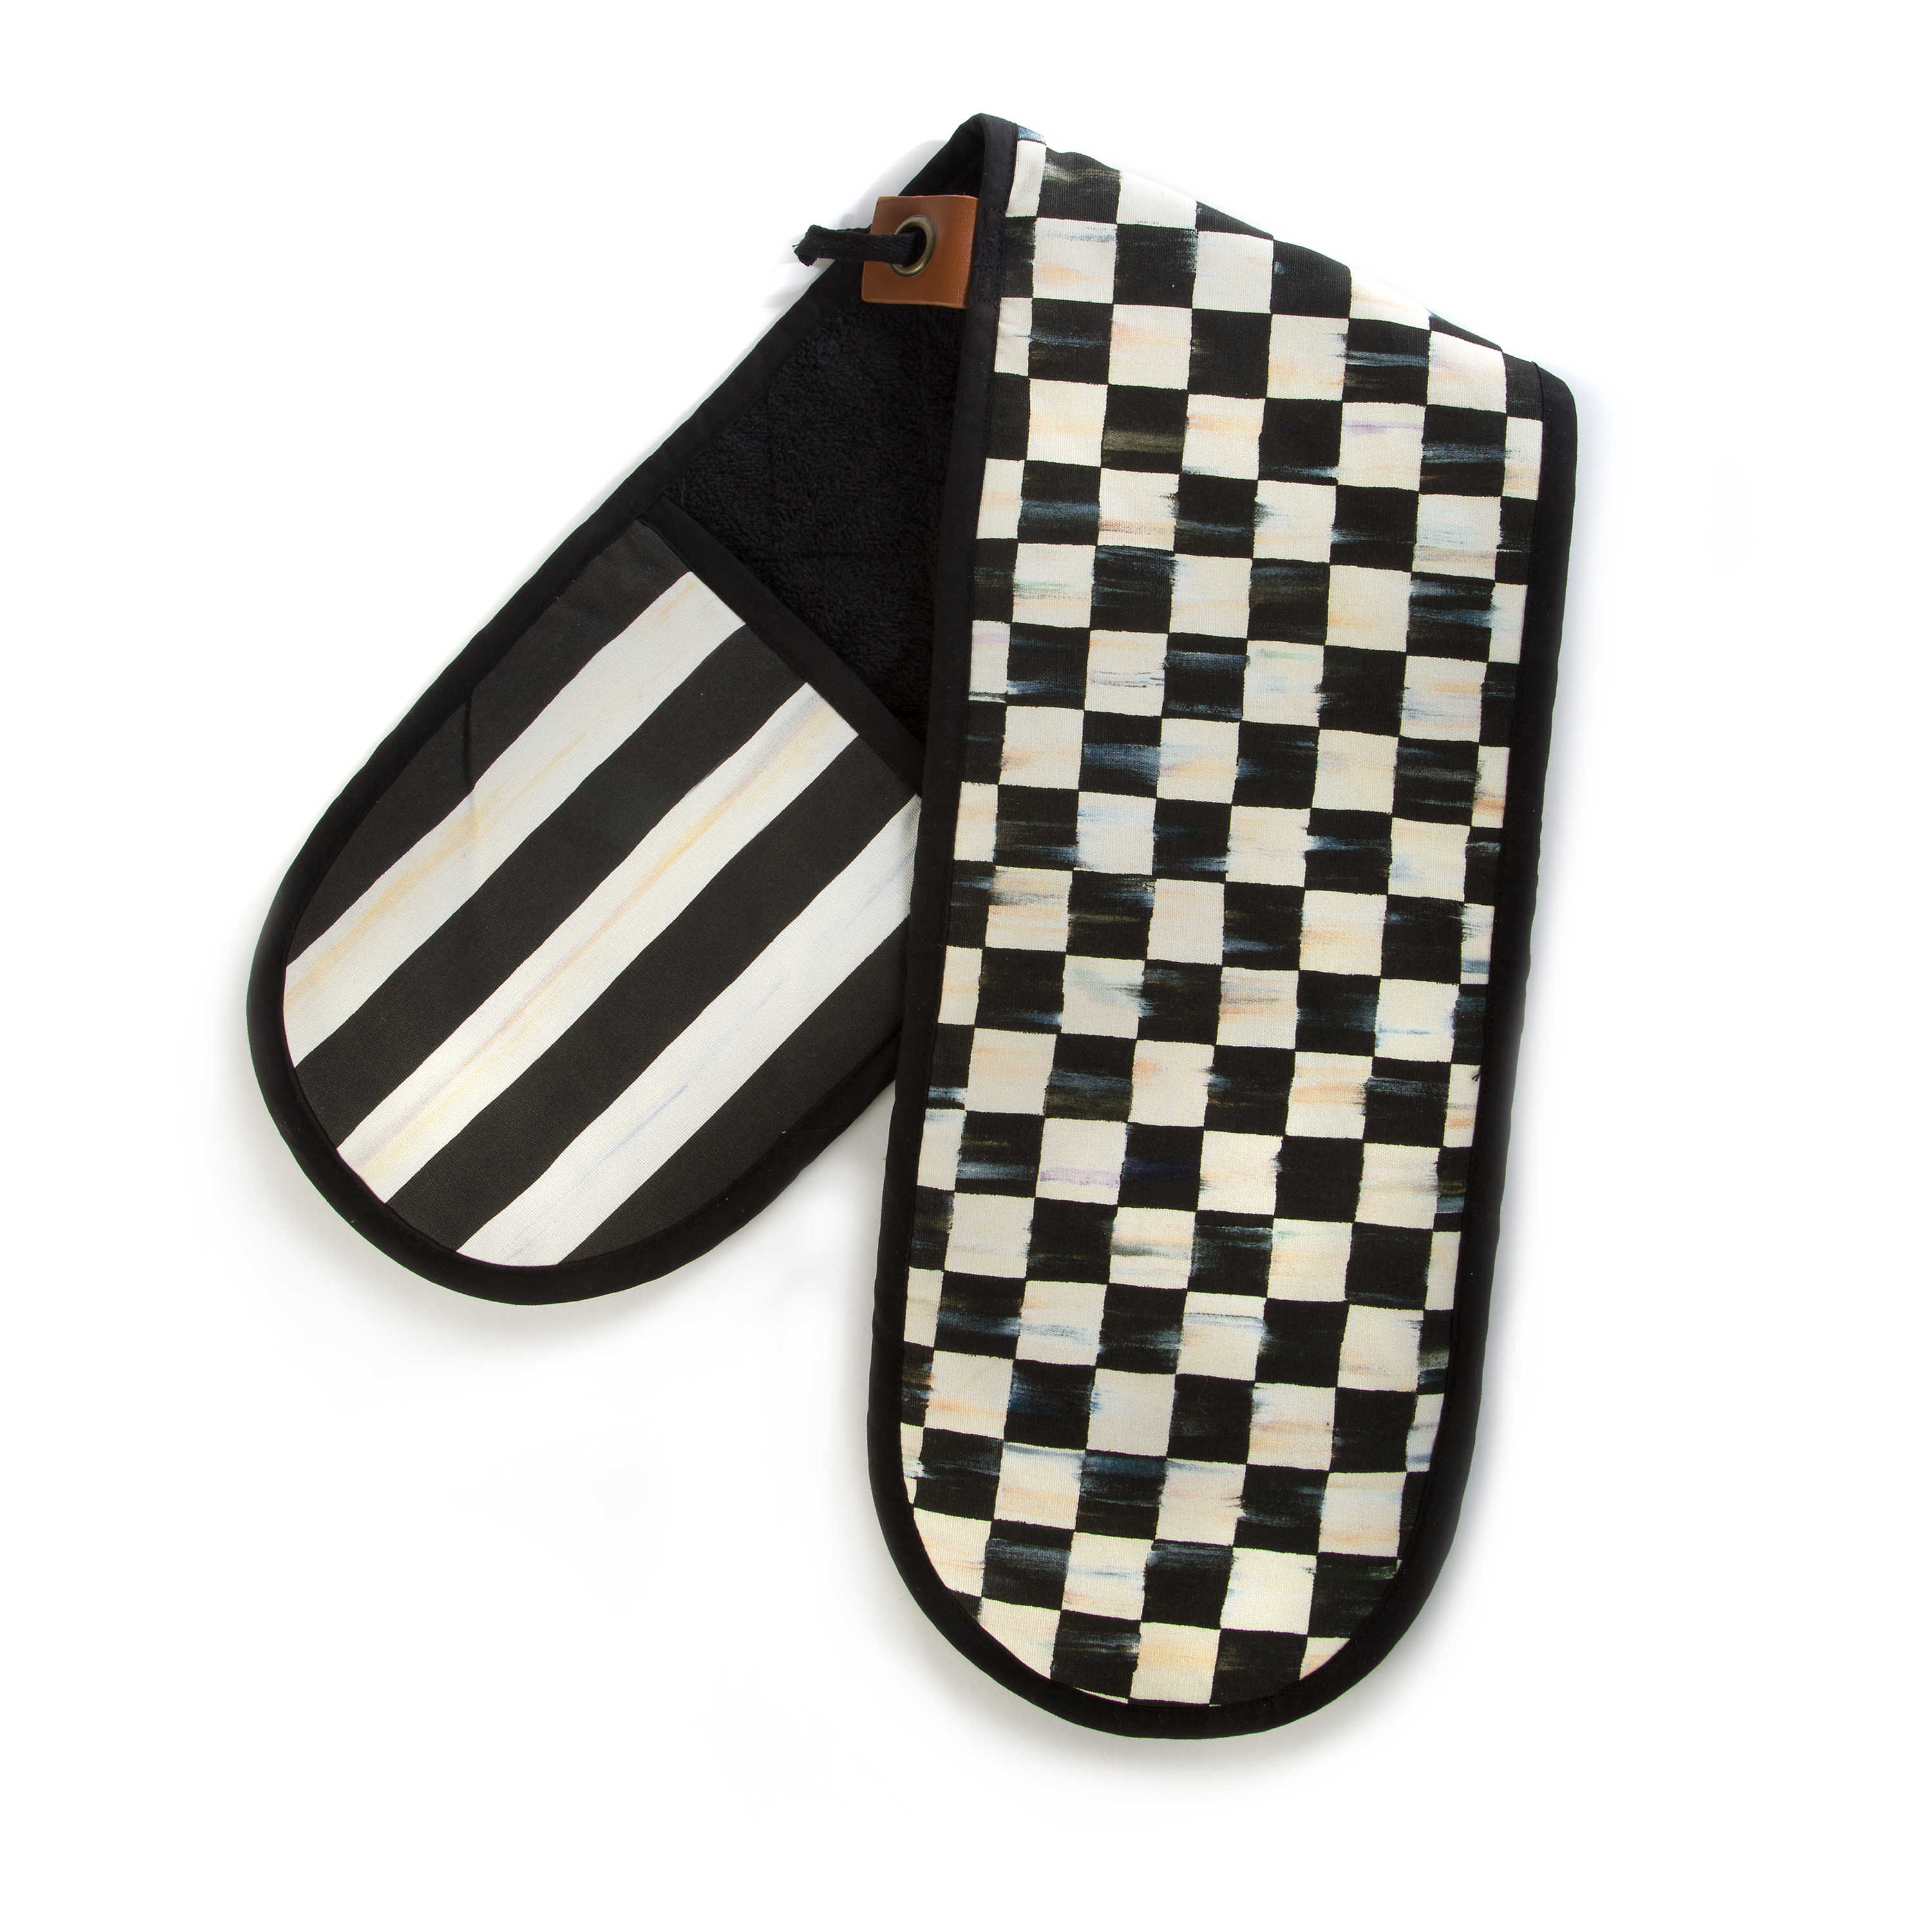 Courtly Check Double Oven Mitt - Large mackenzie-childs Panama 0